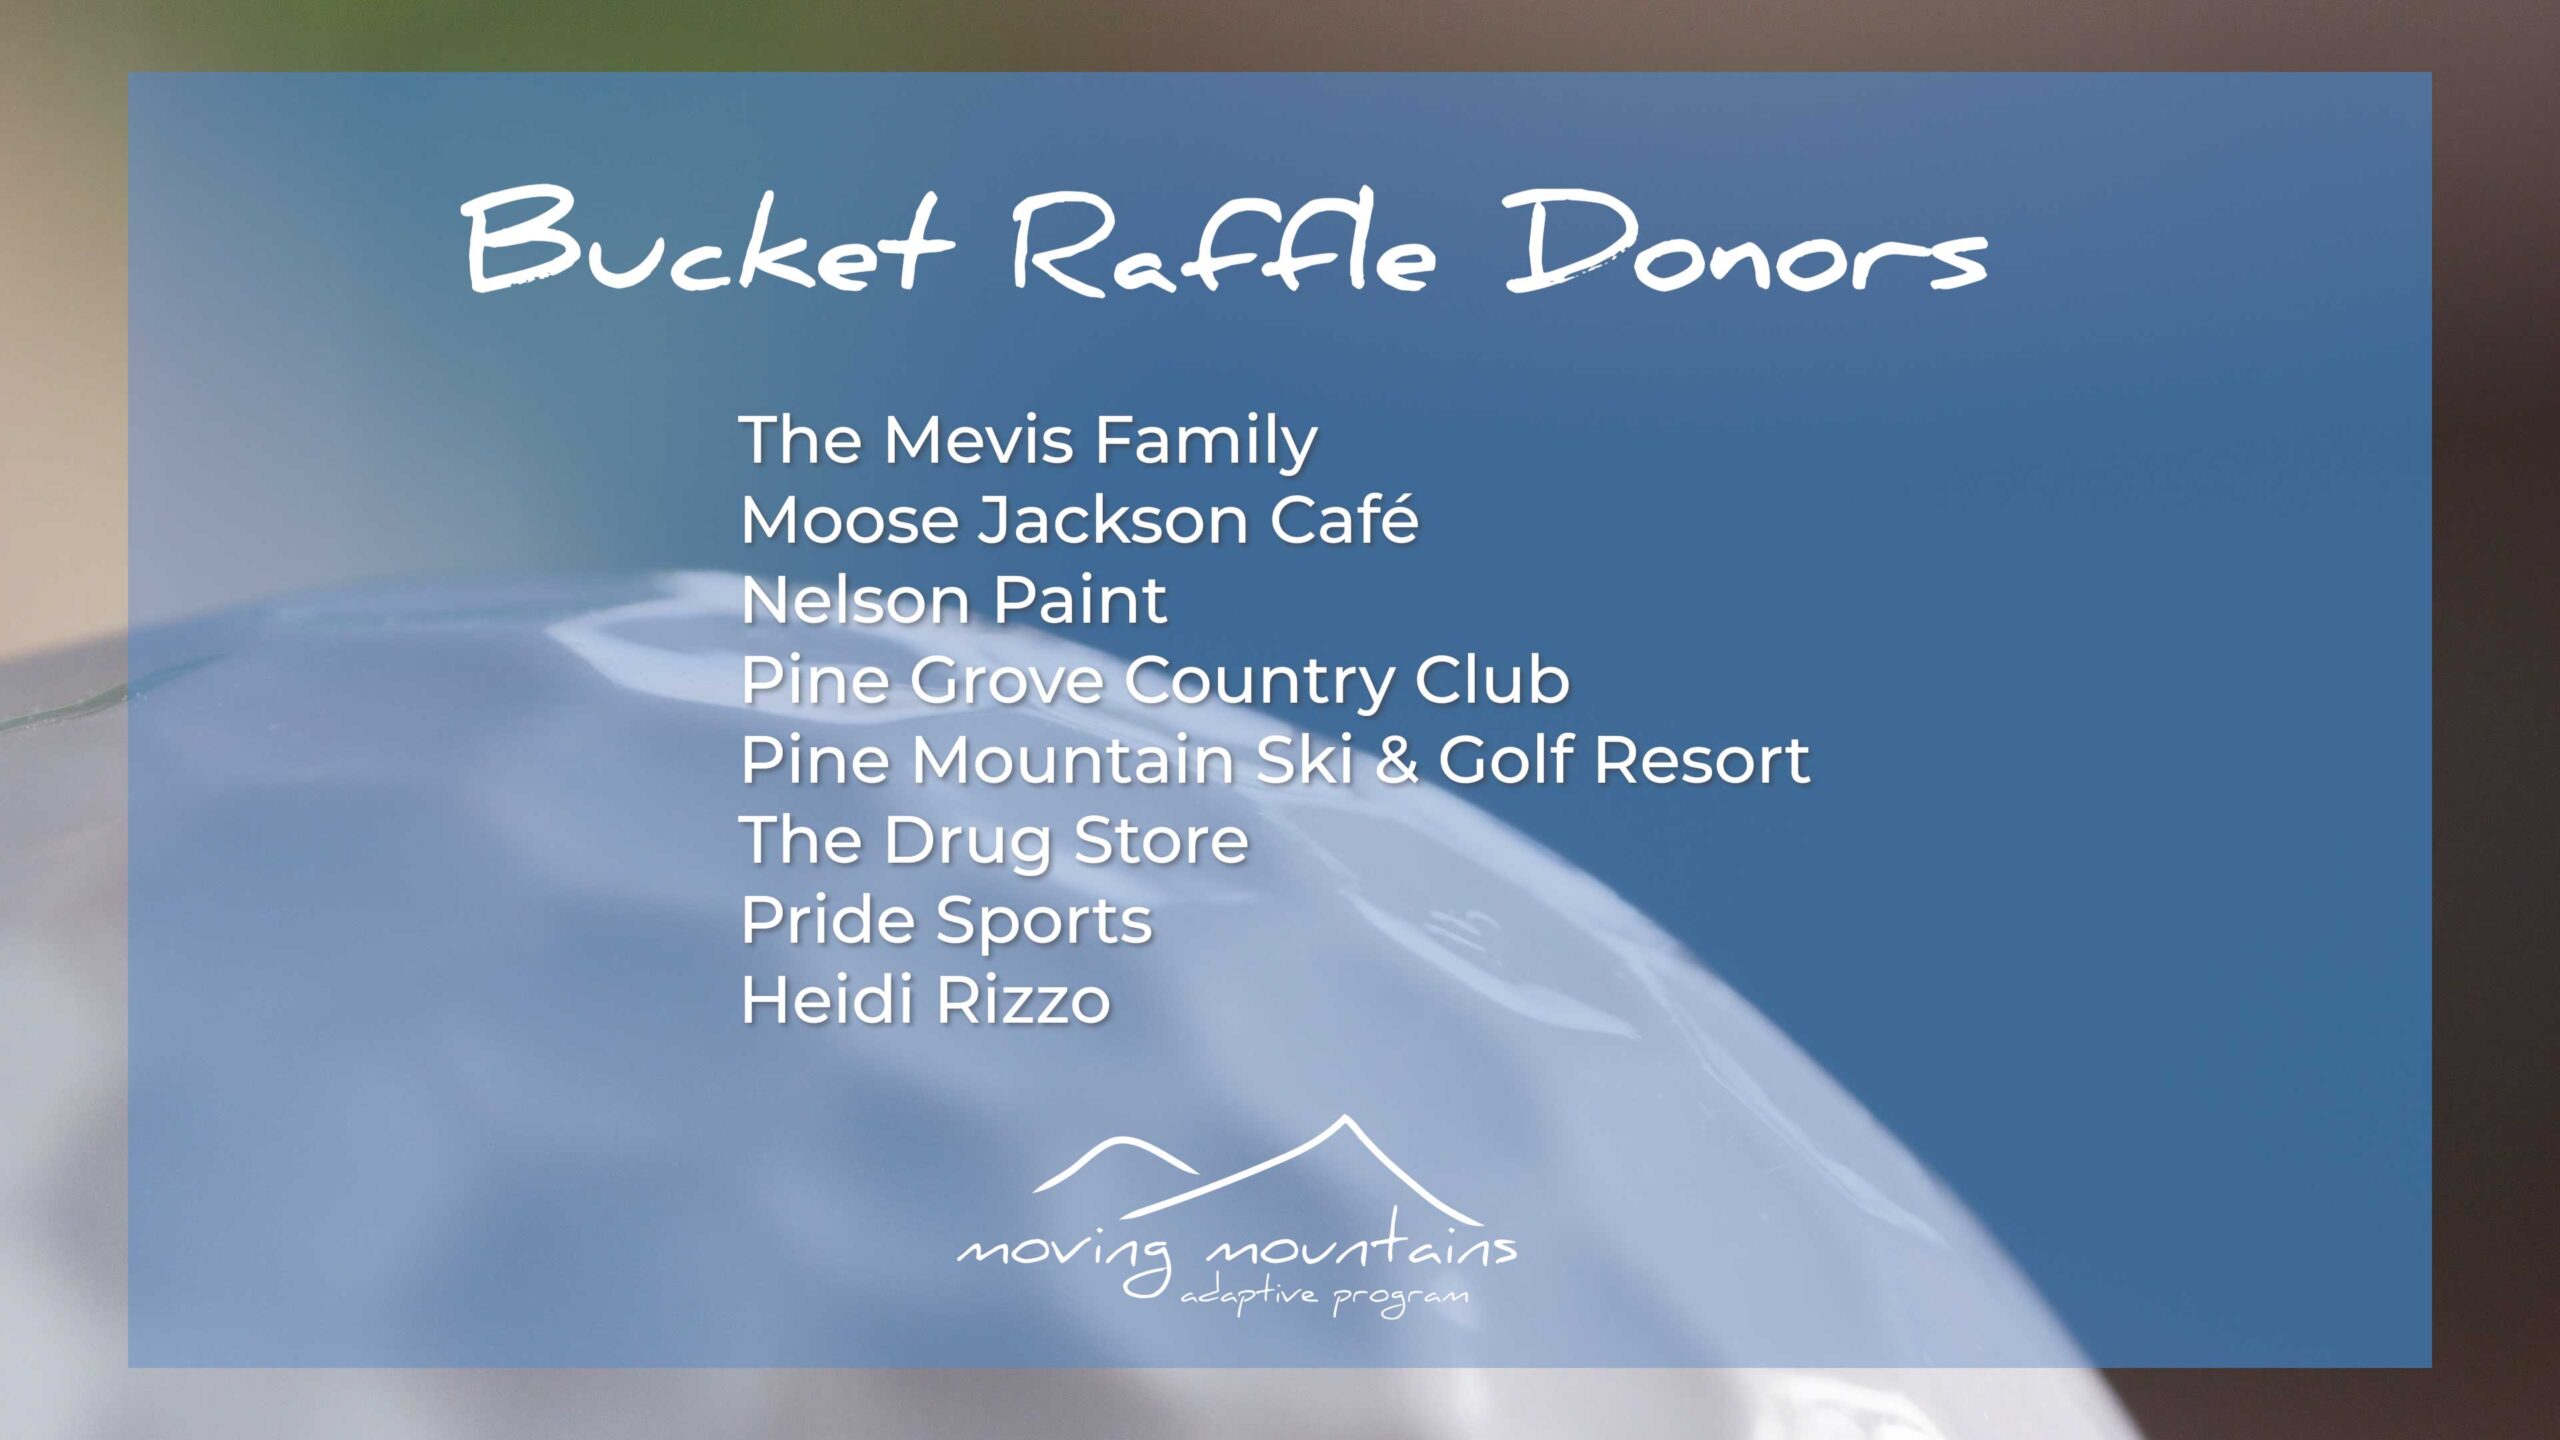 2023 Golf Outing Bucket Raffle Donors